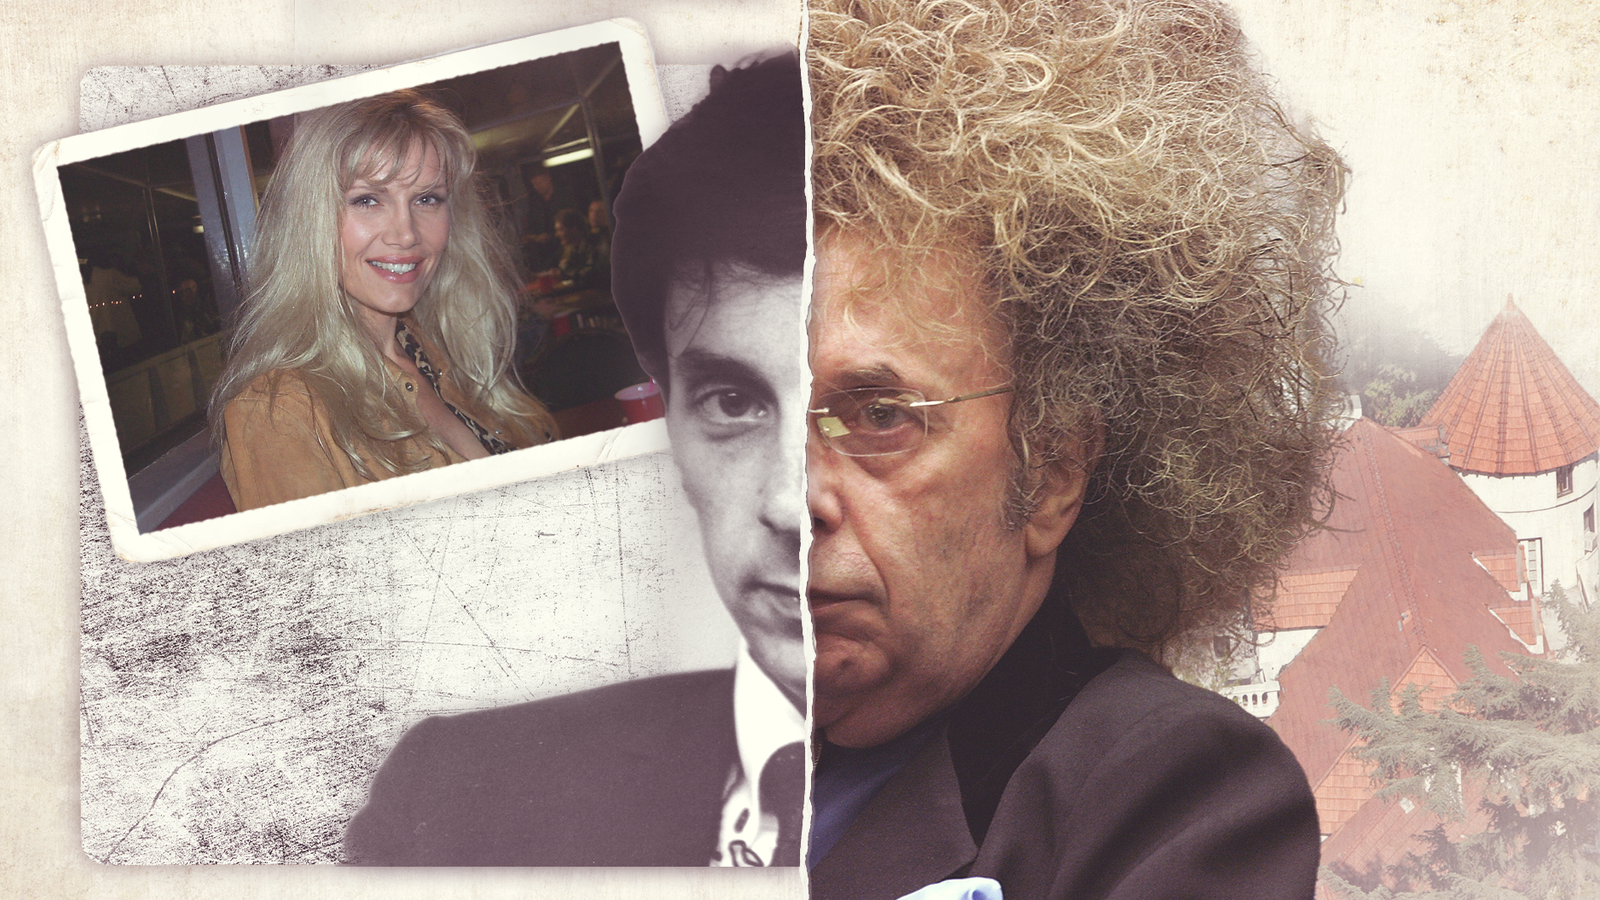 The murderer and musical genius: How Phil Spector killed actress – and why daughter is 'trying to clear his name'